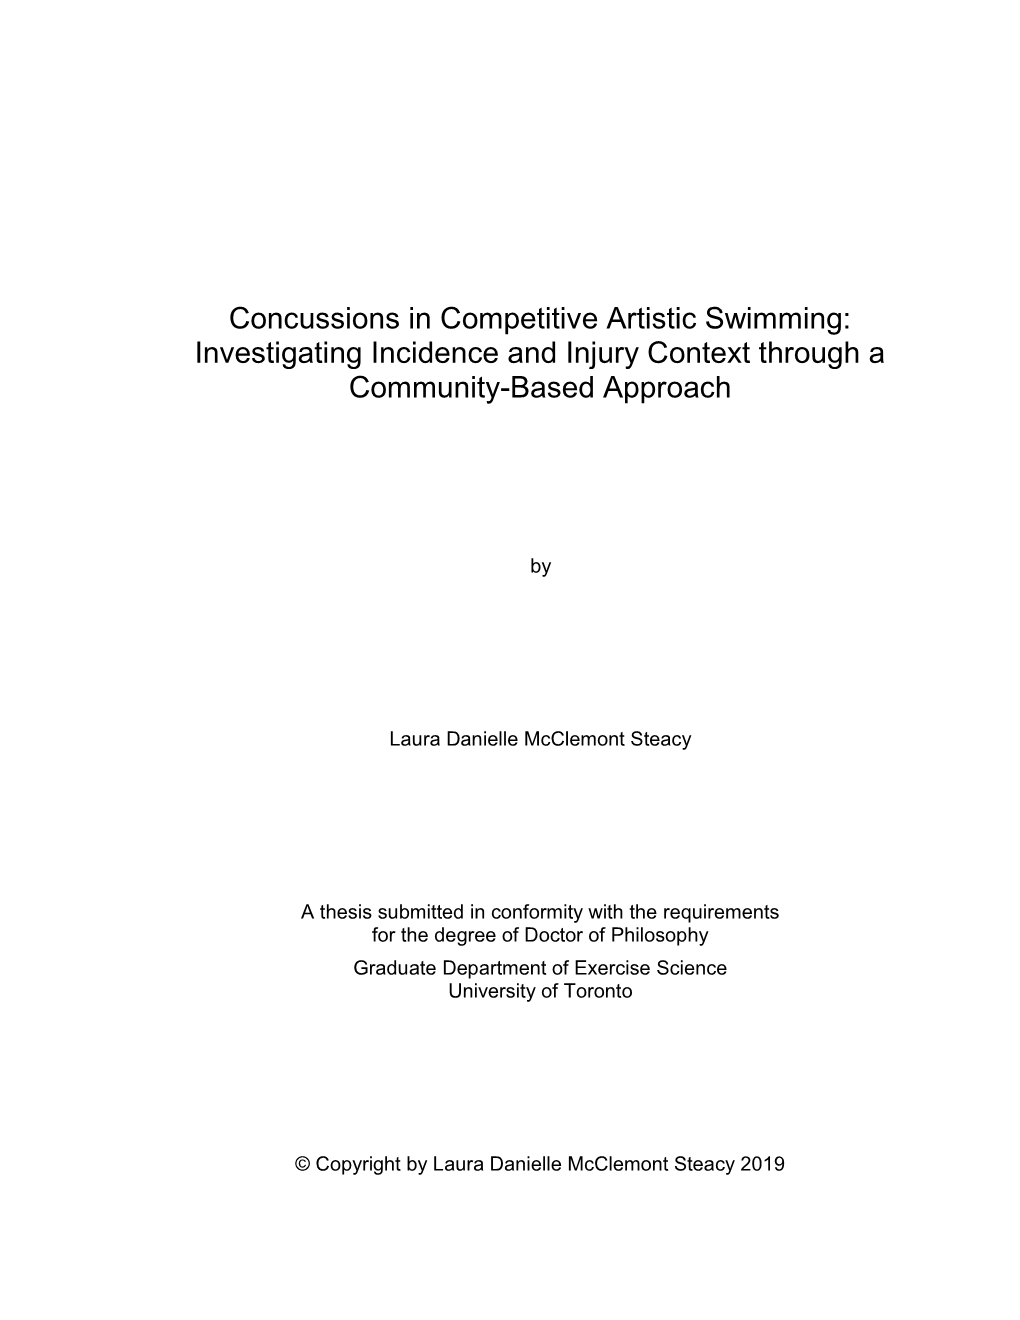 Concussions in Competitive Artistic Swimming: Investigating Incidence and Injury Context Through a Community-Based Approach